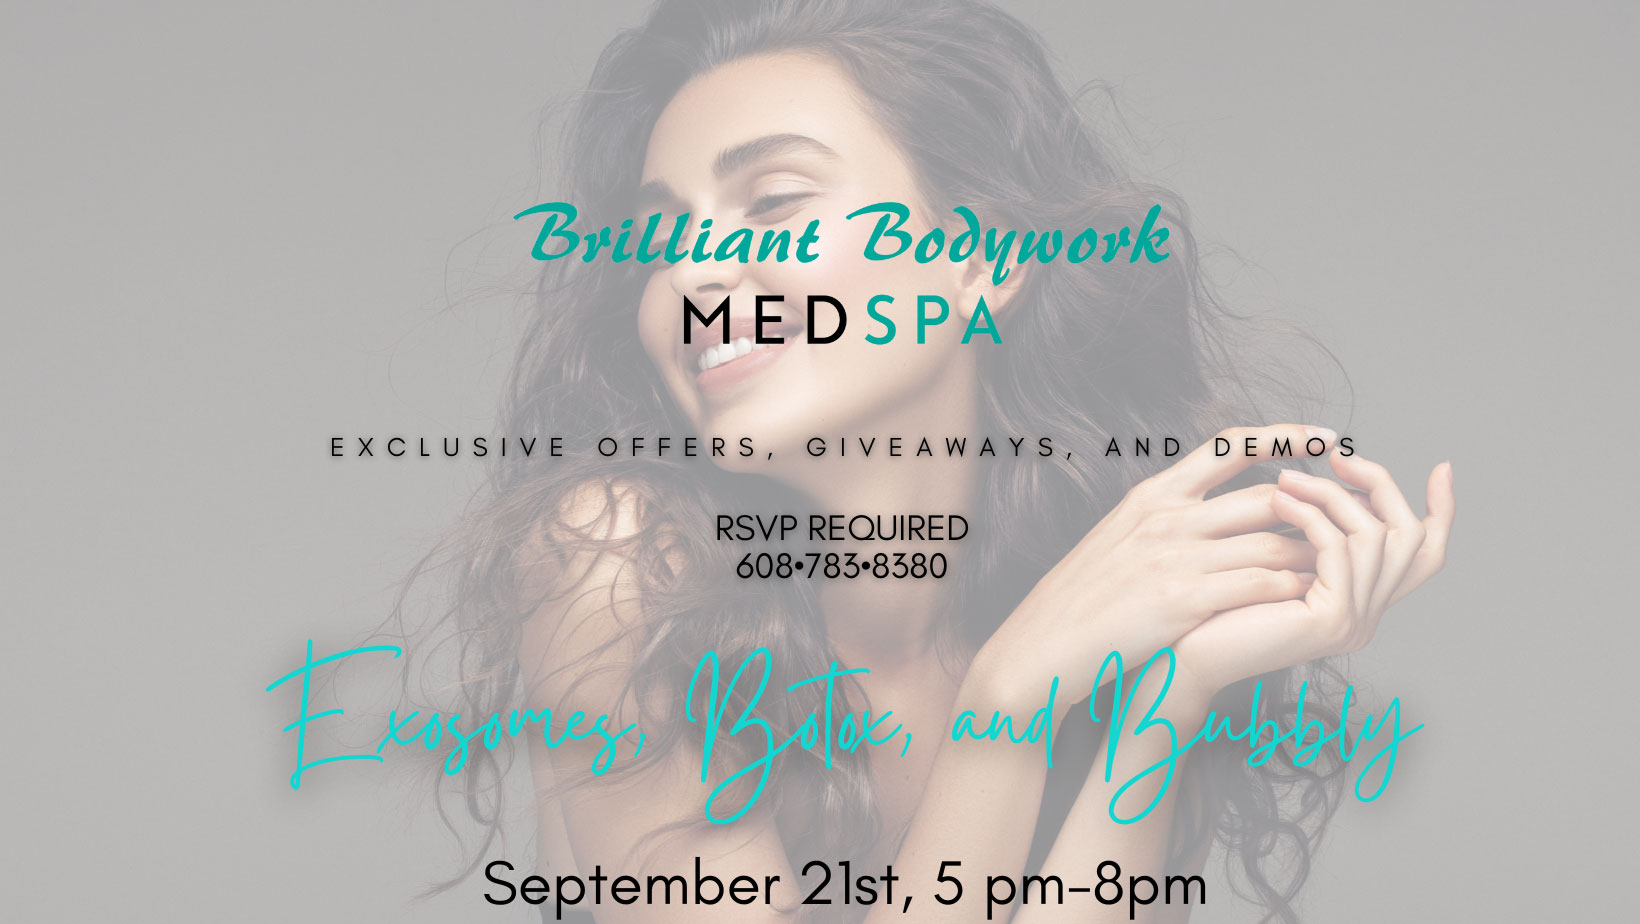 Join us September 21st for our special Exosomes, Botox, and Bubbly Event.